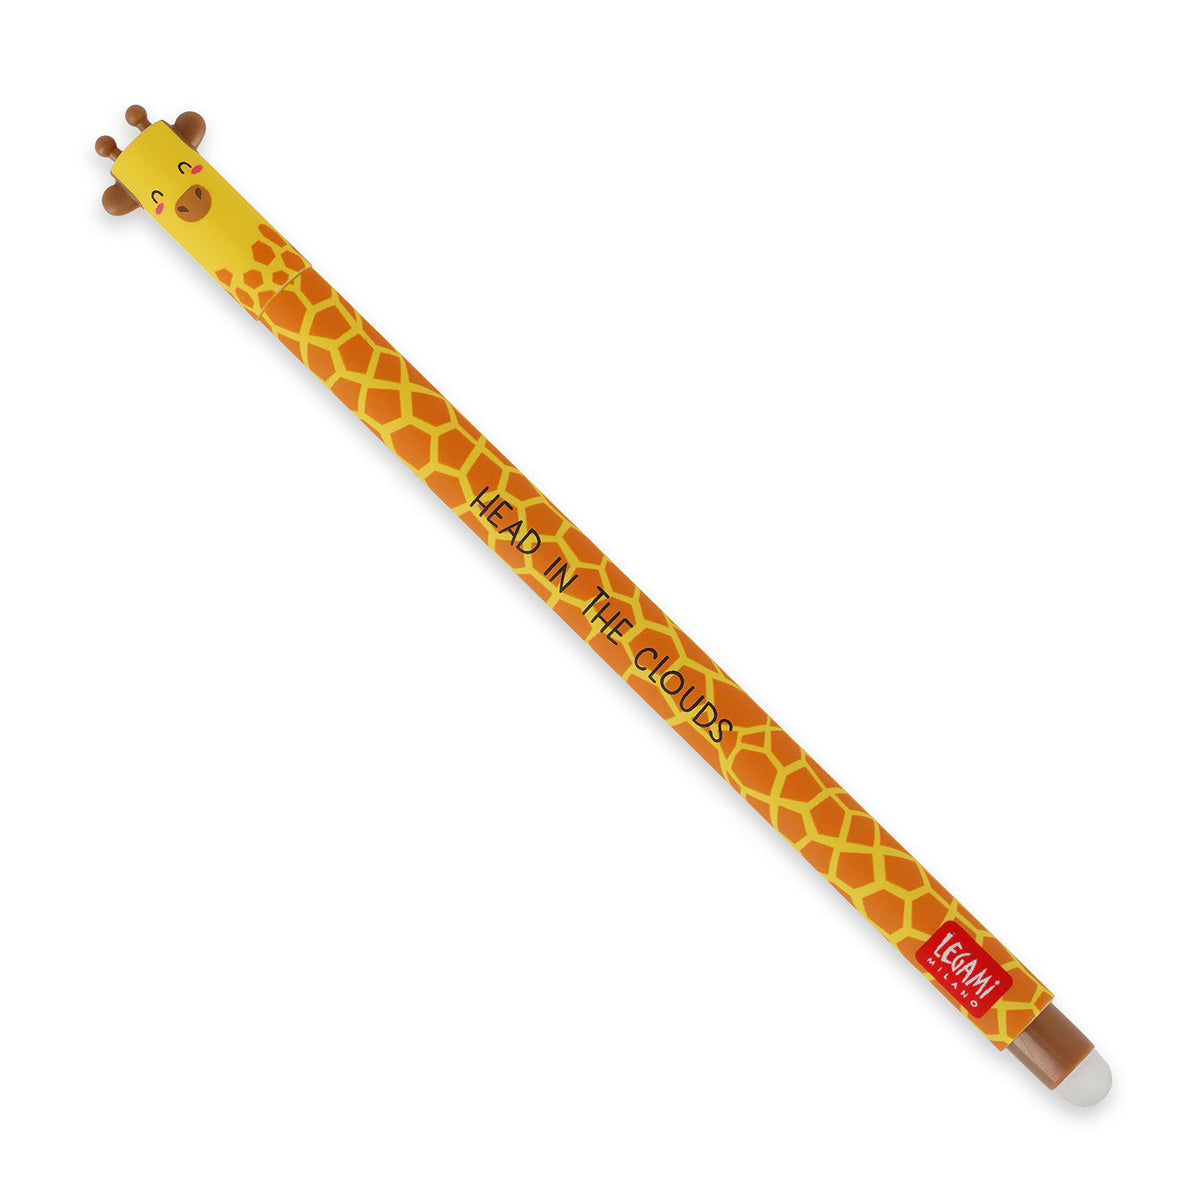 An image of a giraffe print erasable pen by Legami. The cap of the pen is like the head of a giraffe with giraffe ears formed on the top and sides. It has an erasable ball at the other end of the pen.